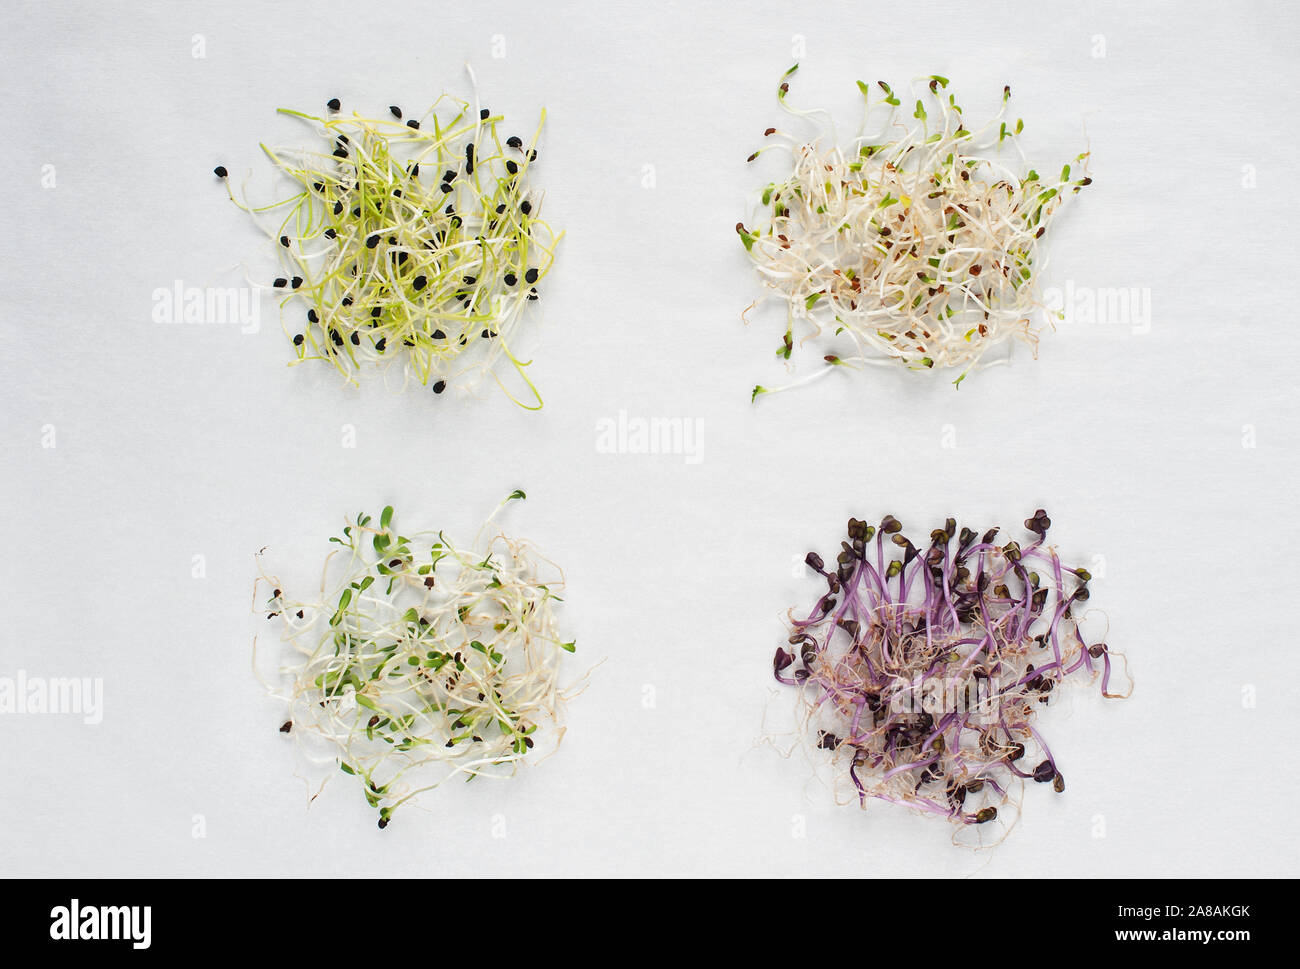 Micro greens on white background. Healthy eating concept of fresh sprouts.. Symbol of health and beauty. Stock Photo